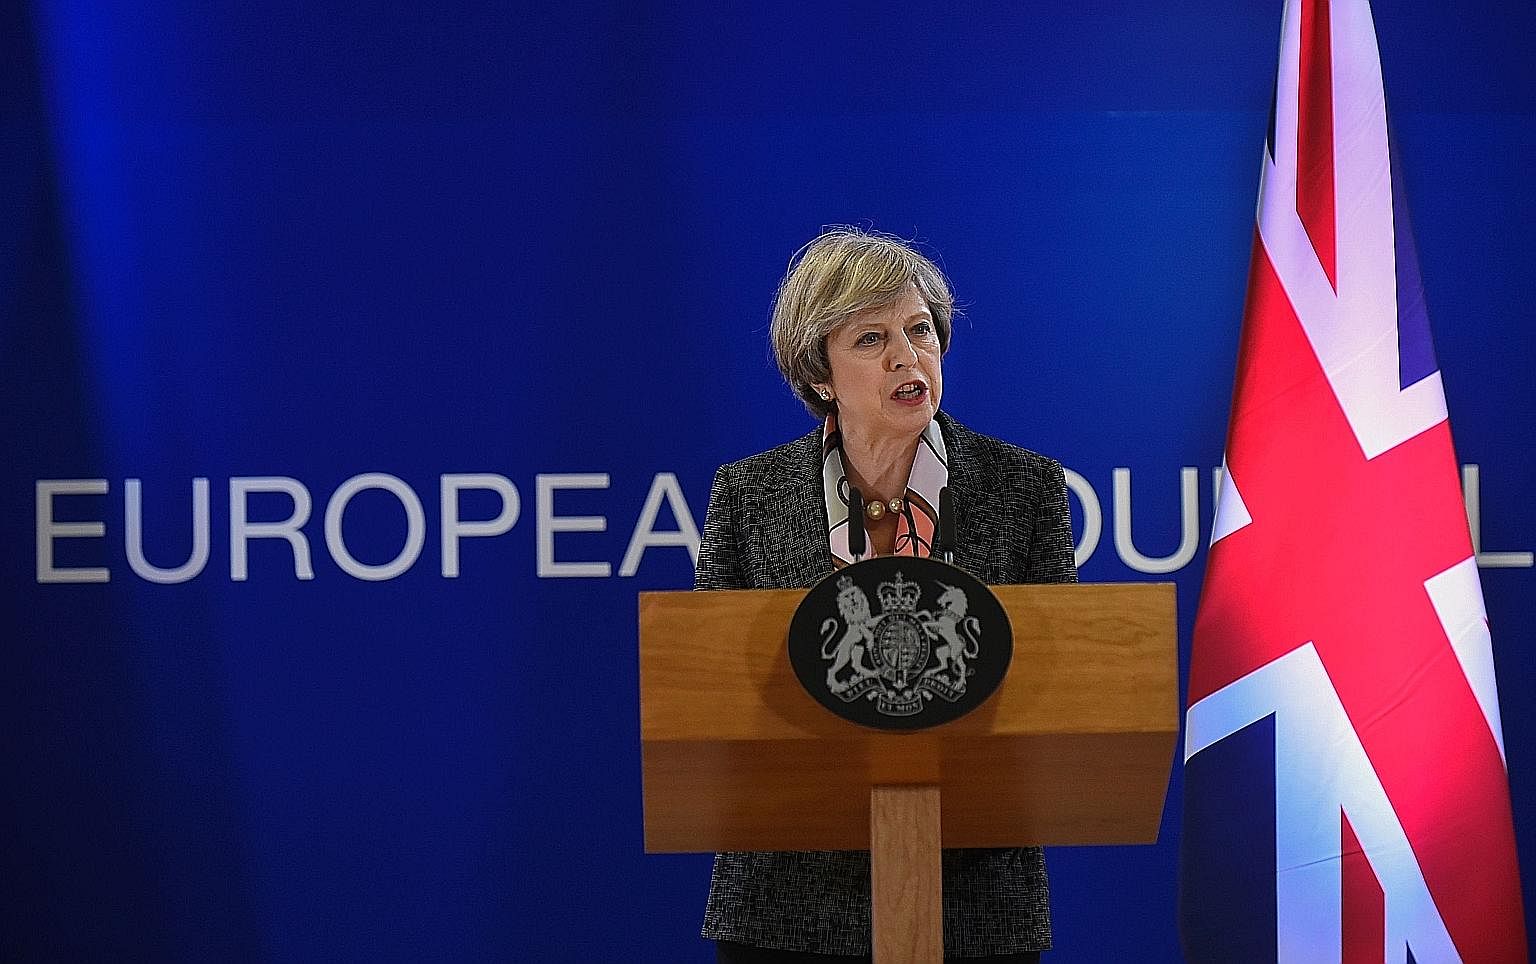 British Prime Minister Theresa May is regarded by counterparts as an unyielding negotiating partner: utterly straight but not flexible enough to find compromises on the hoof. Amid the intensity of the final round of Brexit talks, some believe this co